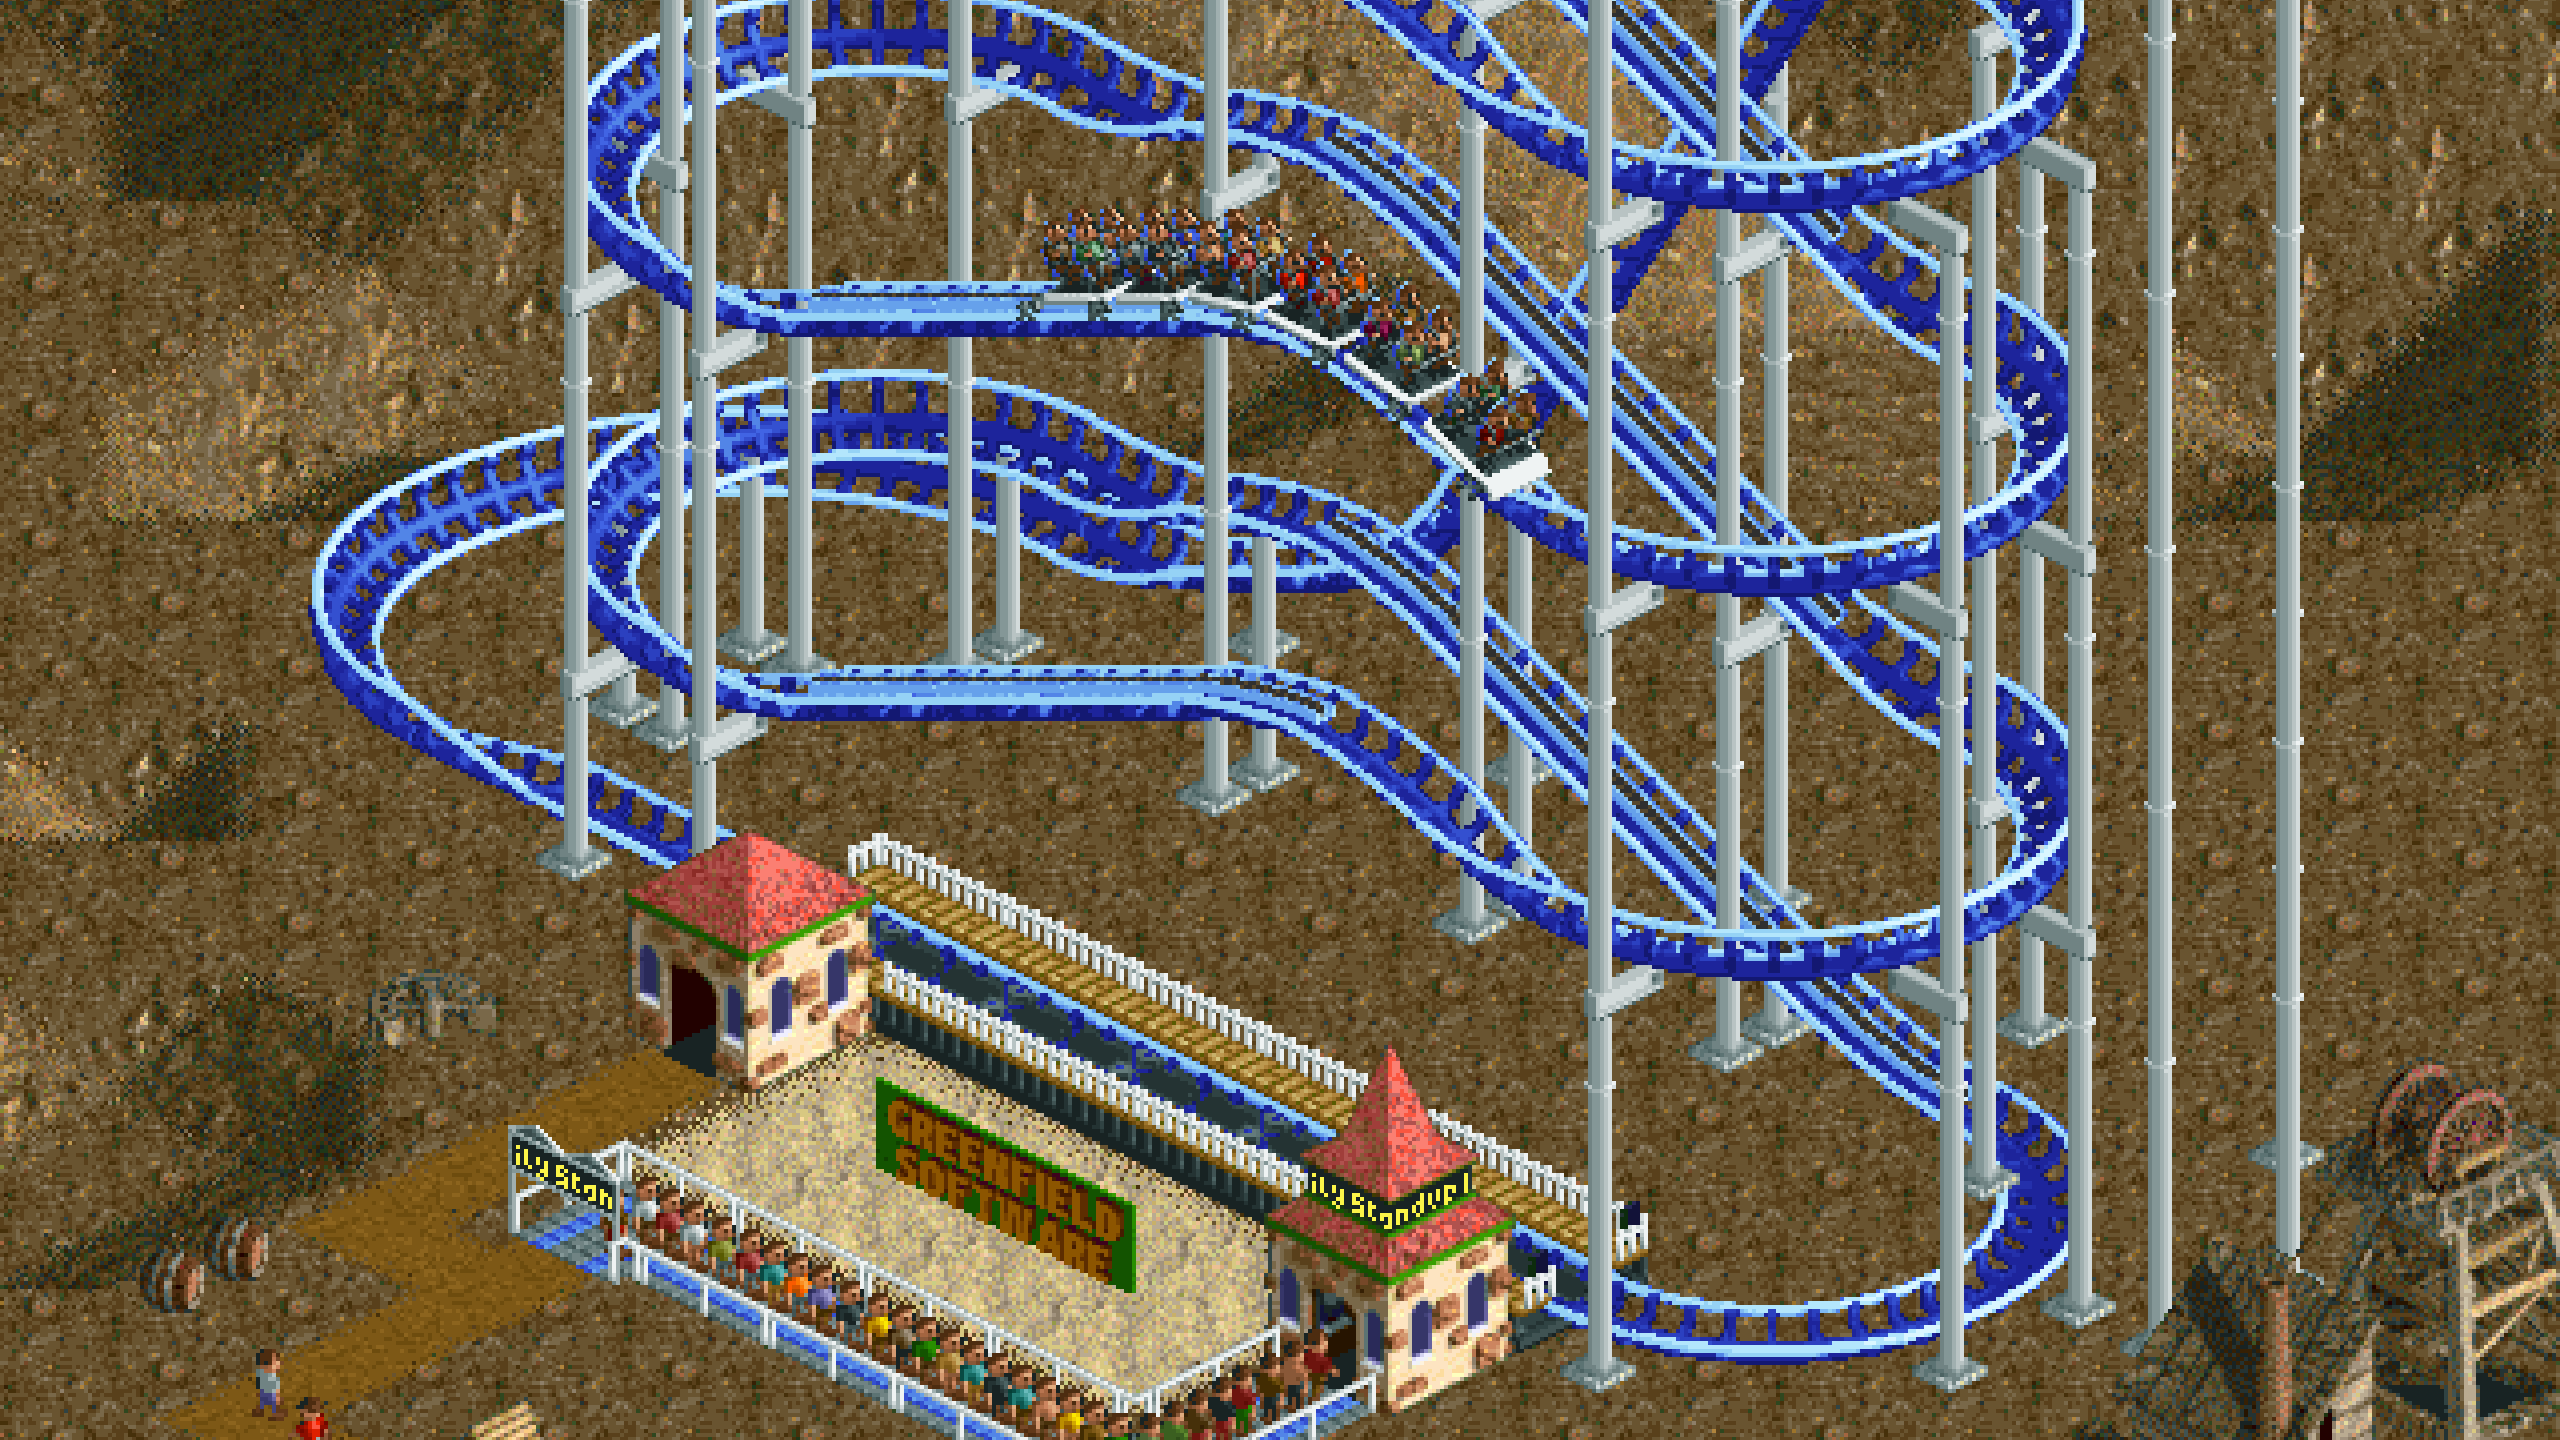 A boring coaster that’s basically just a multi-storey merry-go-round.